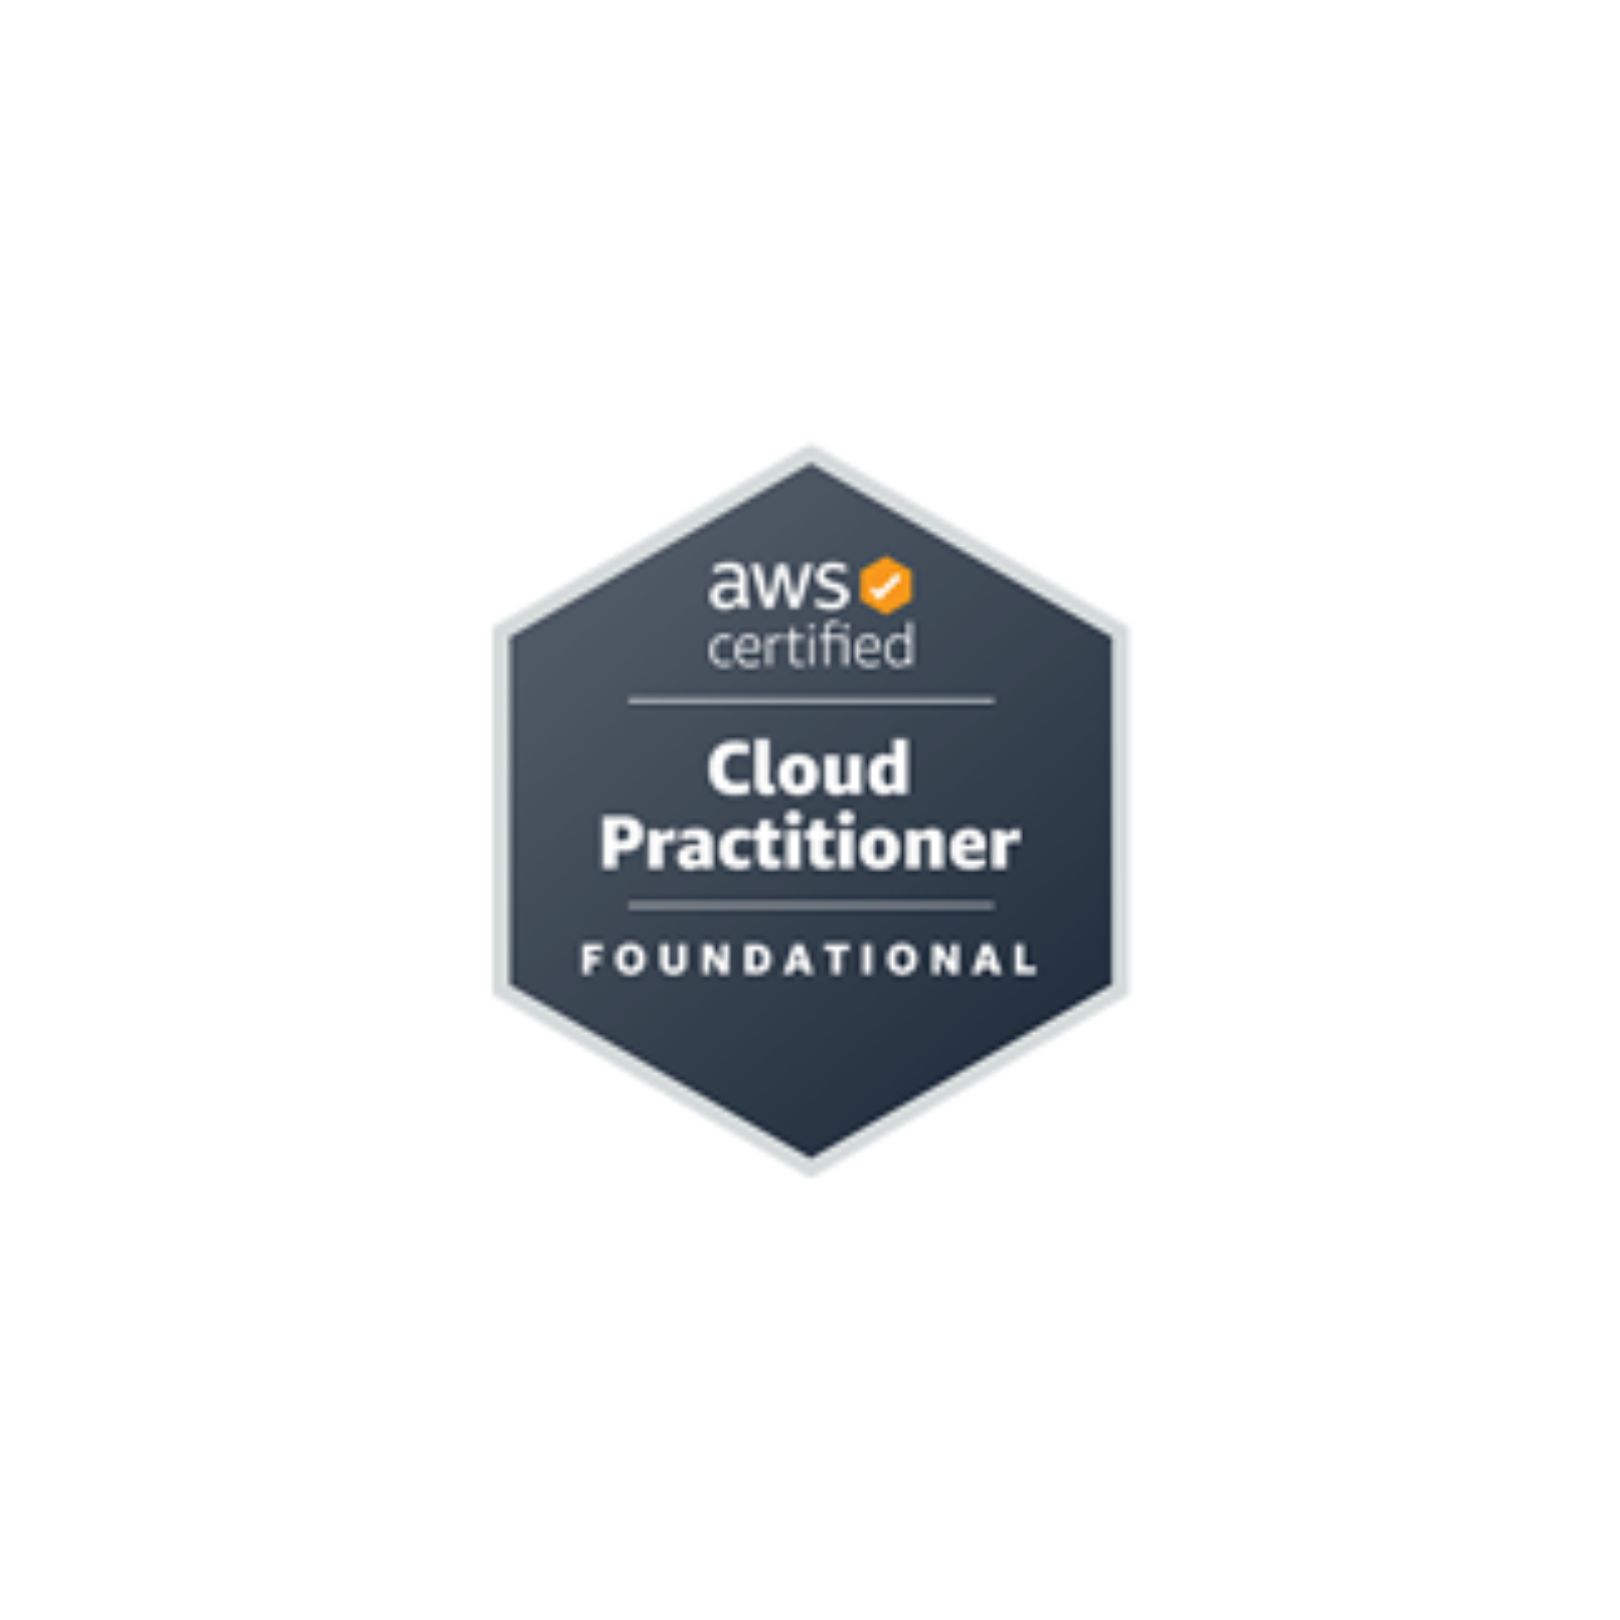 Siamo partner ufficiali AWS Certified Cloud Practitioner